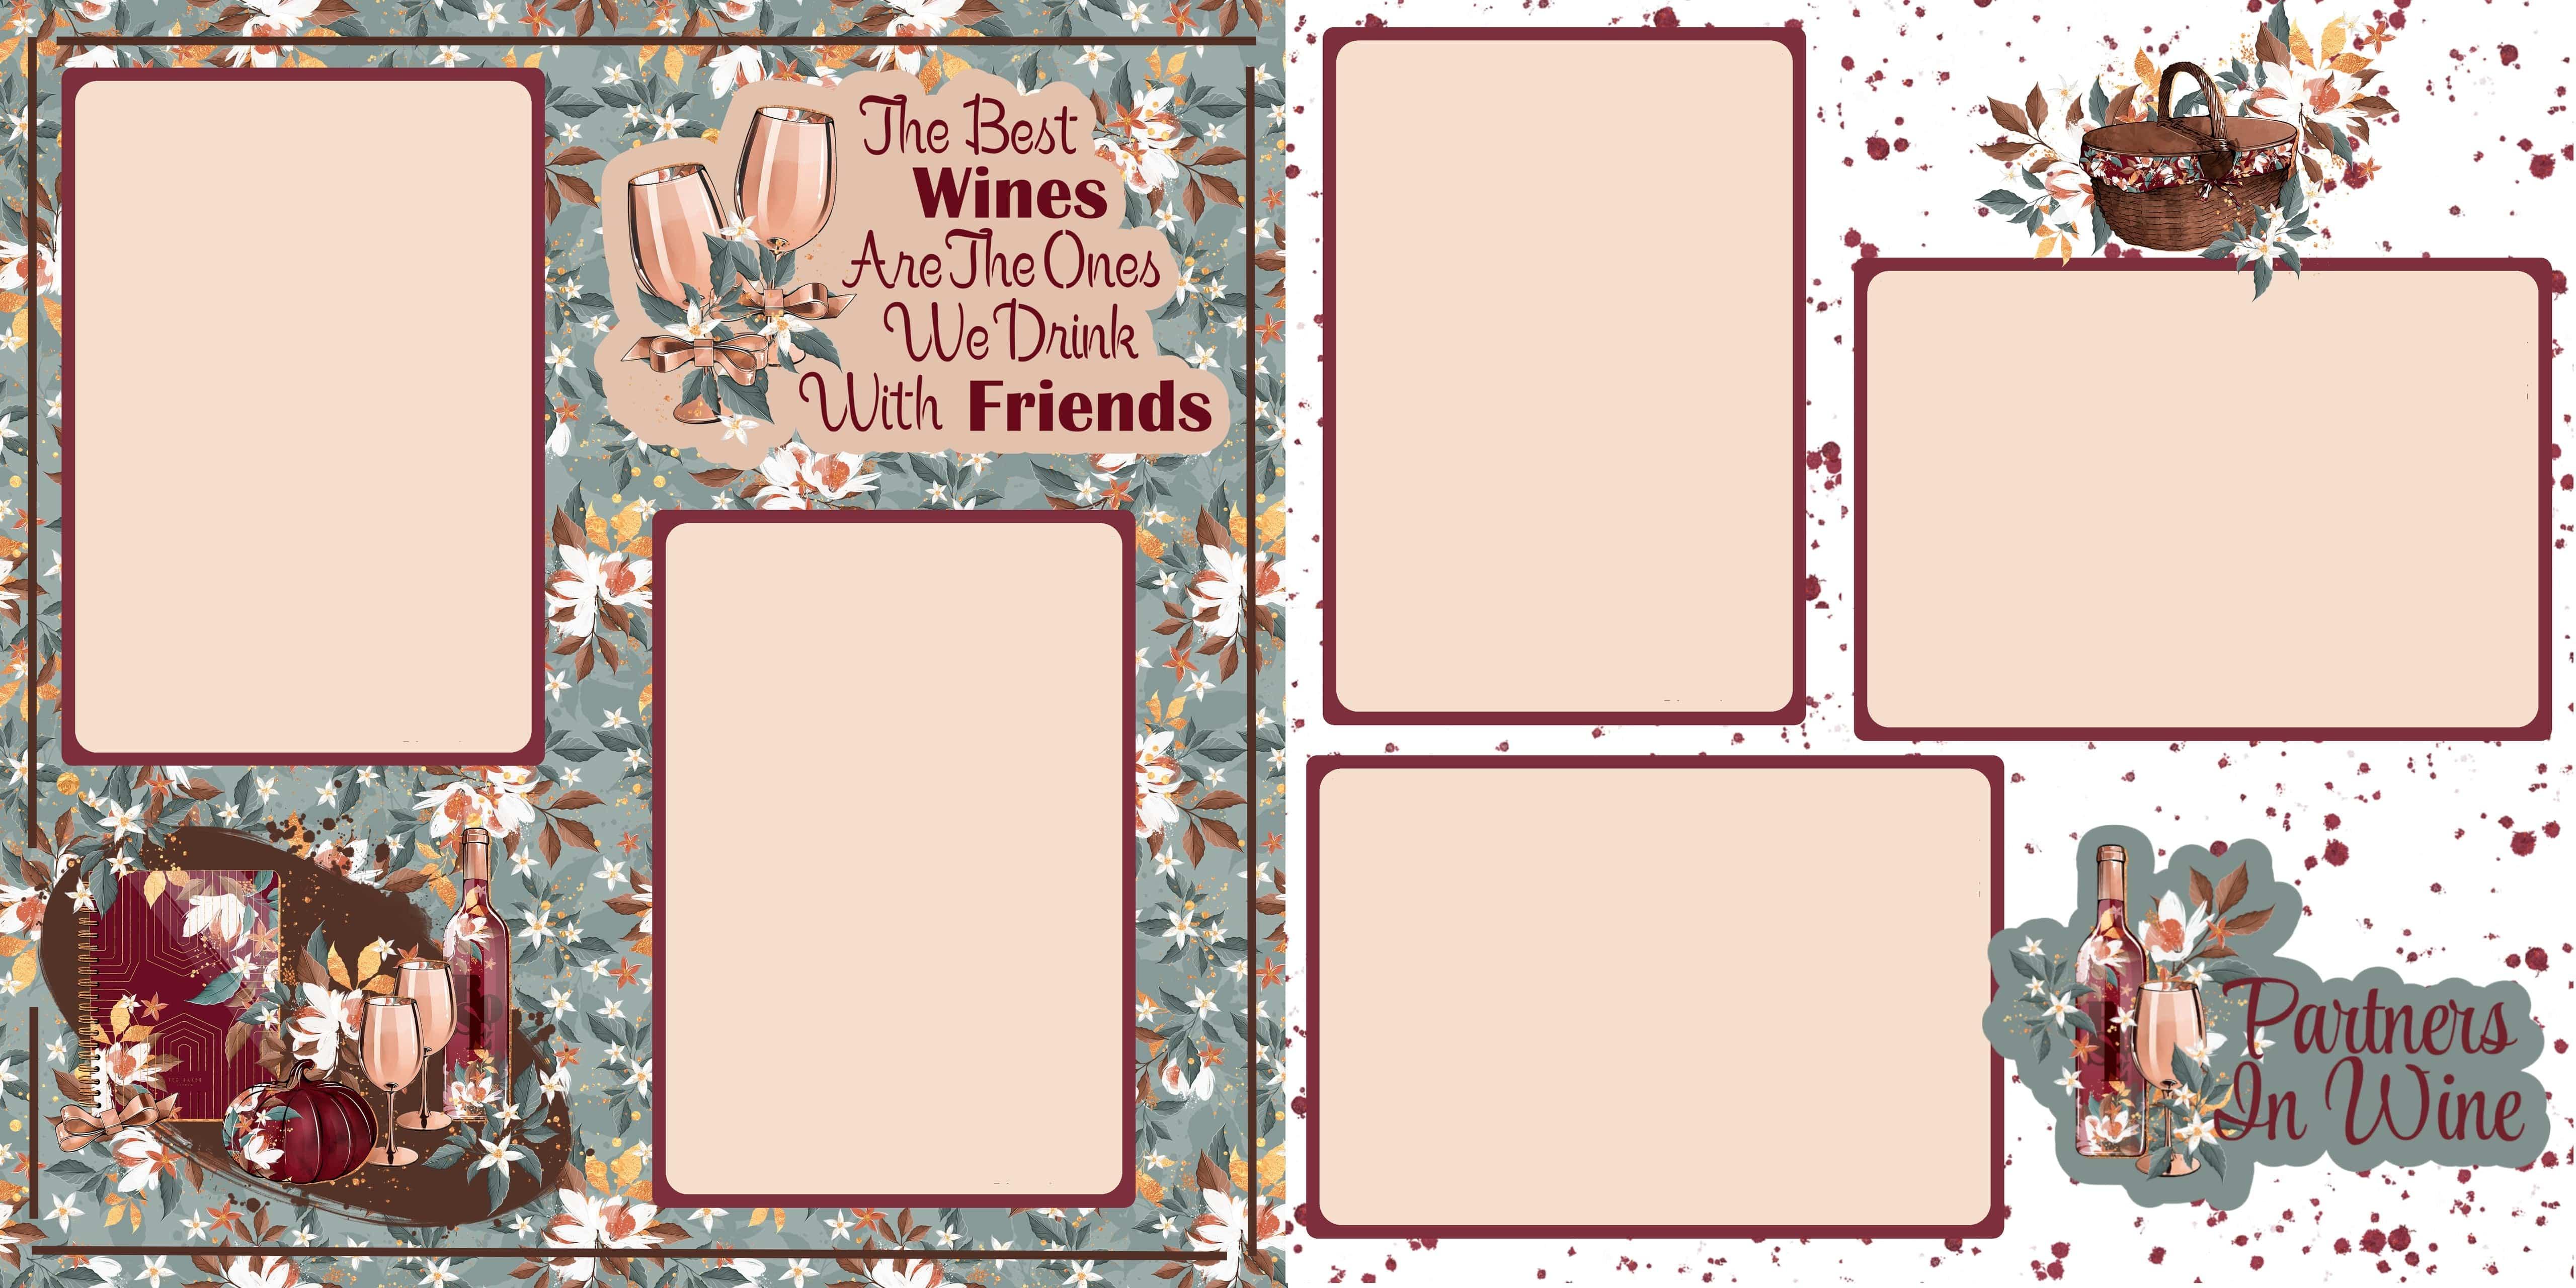 Partners In Wine (2) - 12 x 12 Premade, Printed Scrapbook Pages by SSC Designs